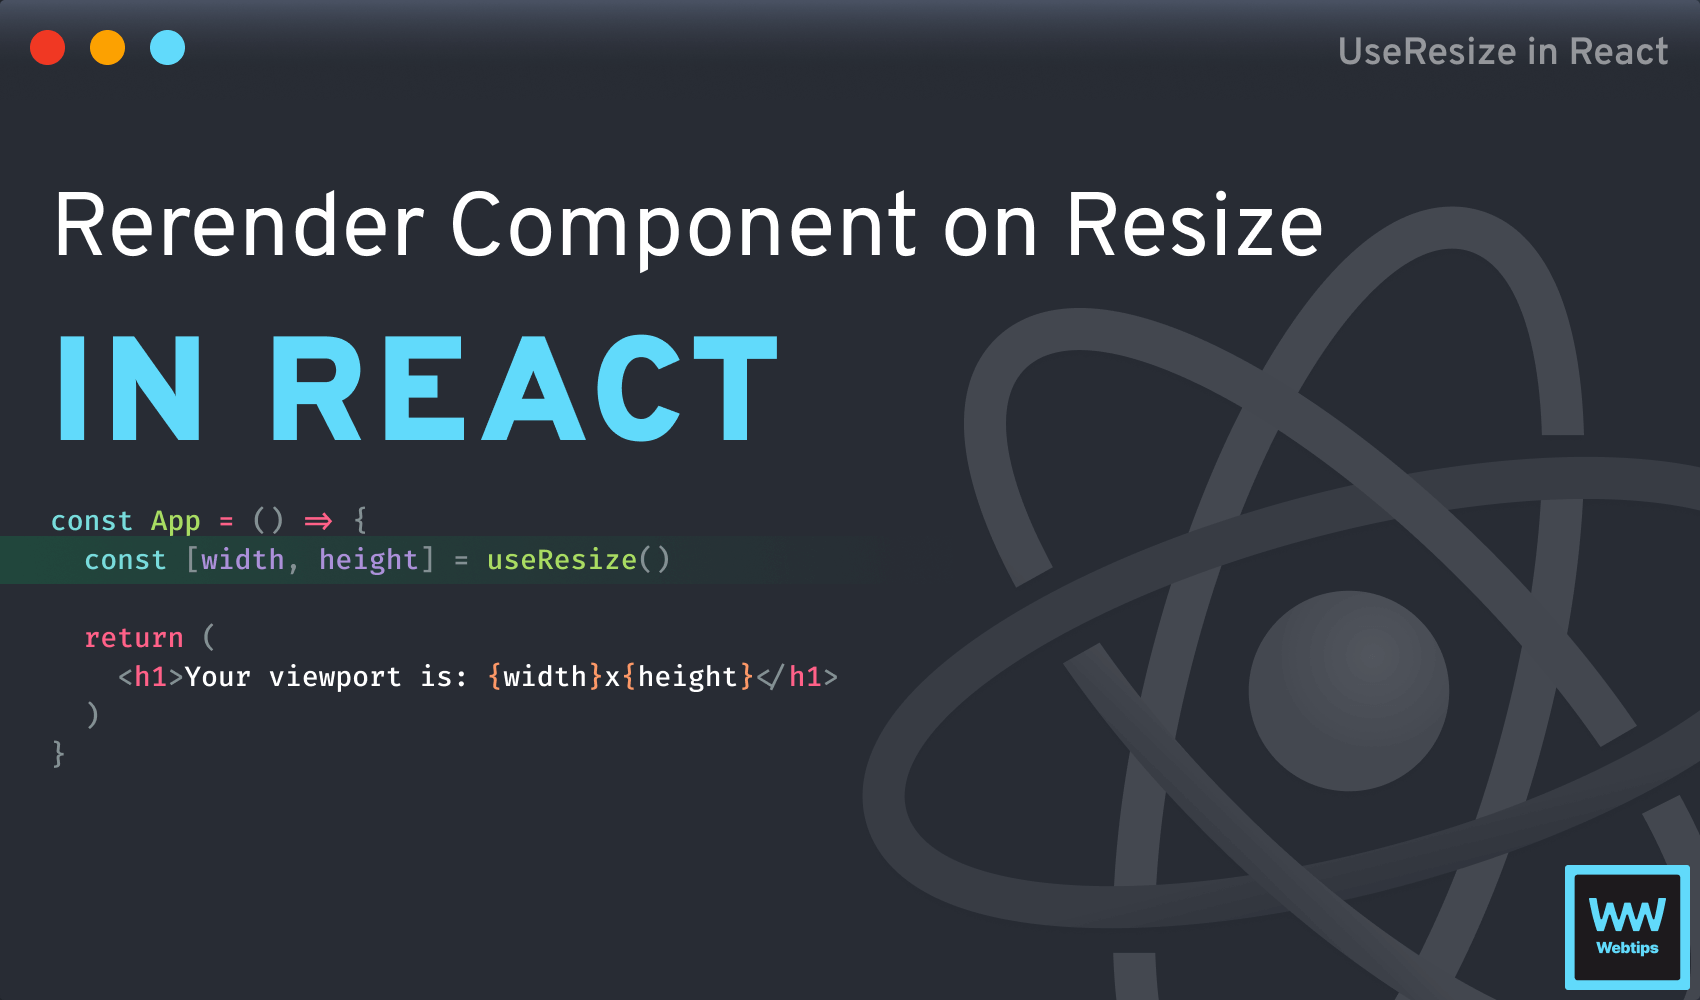 How to Rerender Component on Resize in React